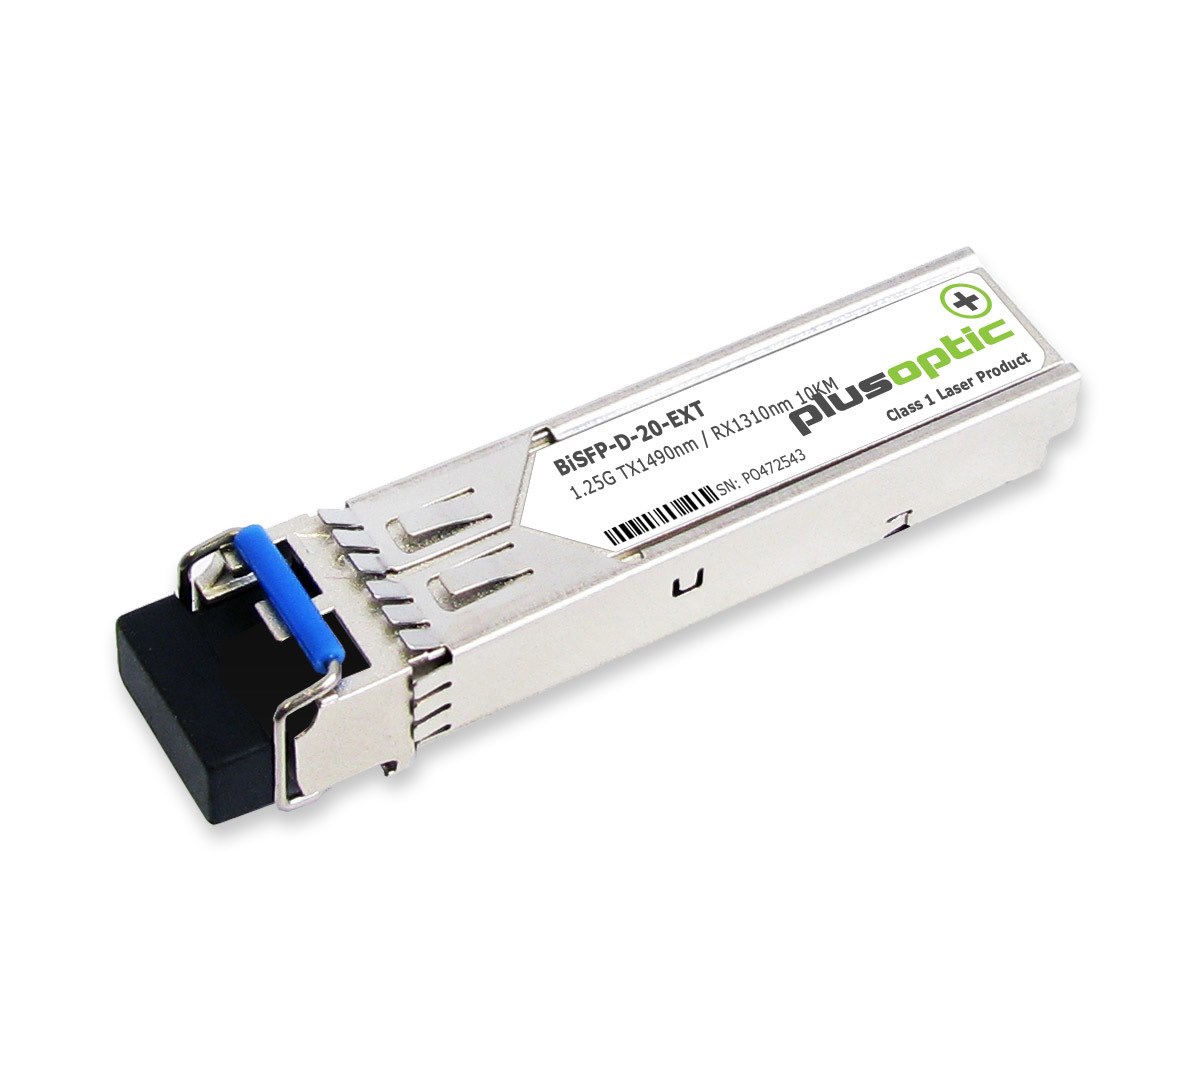 PlusOptic Extreme Compatible (10056 10056H 1G-SFP-BXD) 1.25G, BiDi SFP, TX1490nm / RX1310nm, 20KM Transceiver, LC Connector For SMF With Dom | PlusOptic Bisfp-D-20-Ext